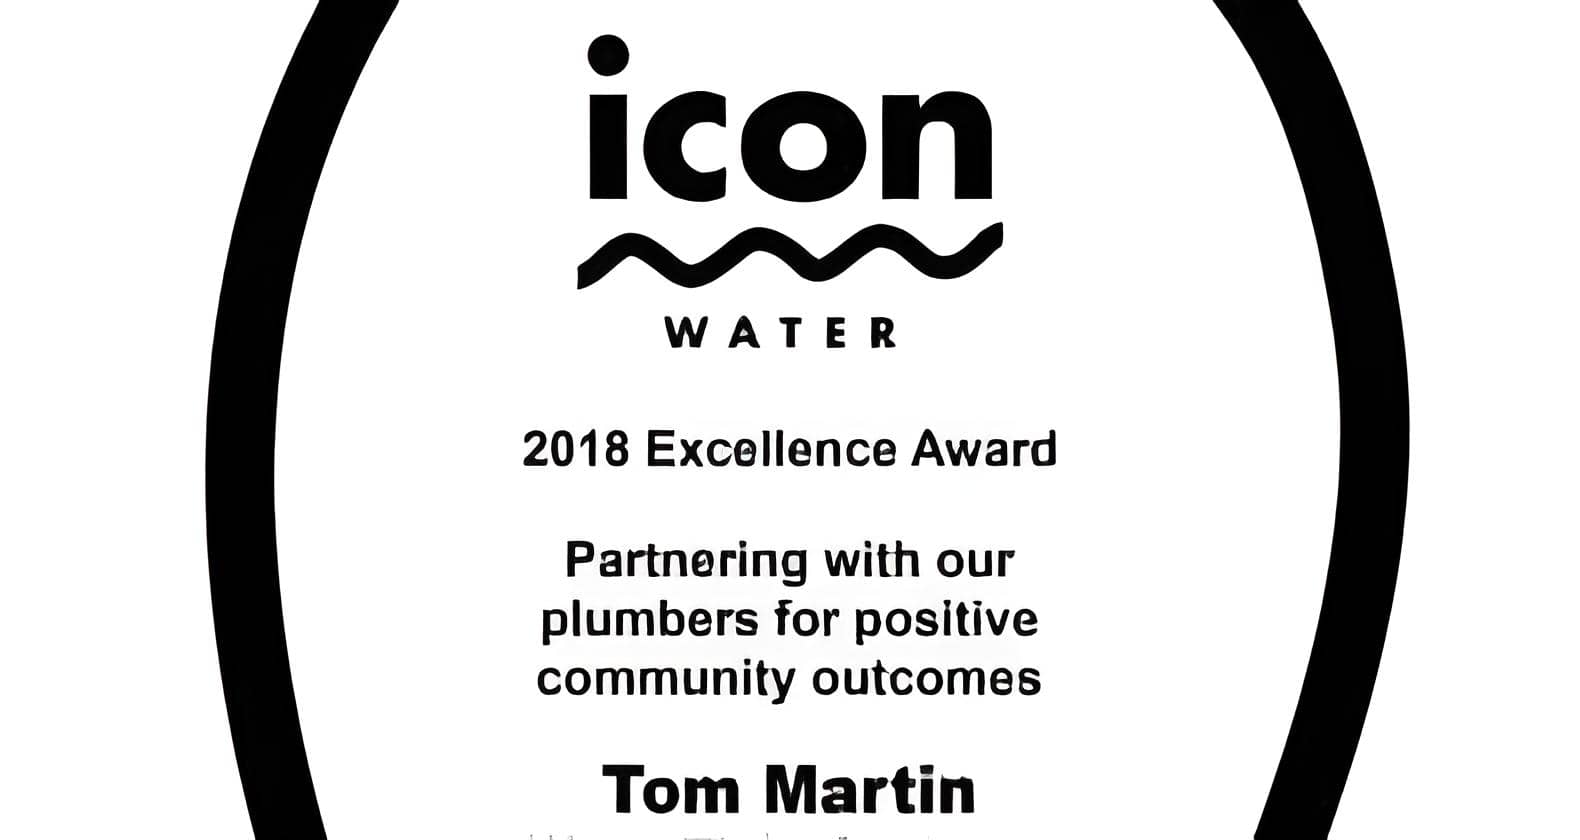 tom martin named as winner of the 2018 Excellence Award from Icon Water